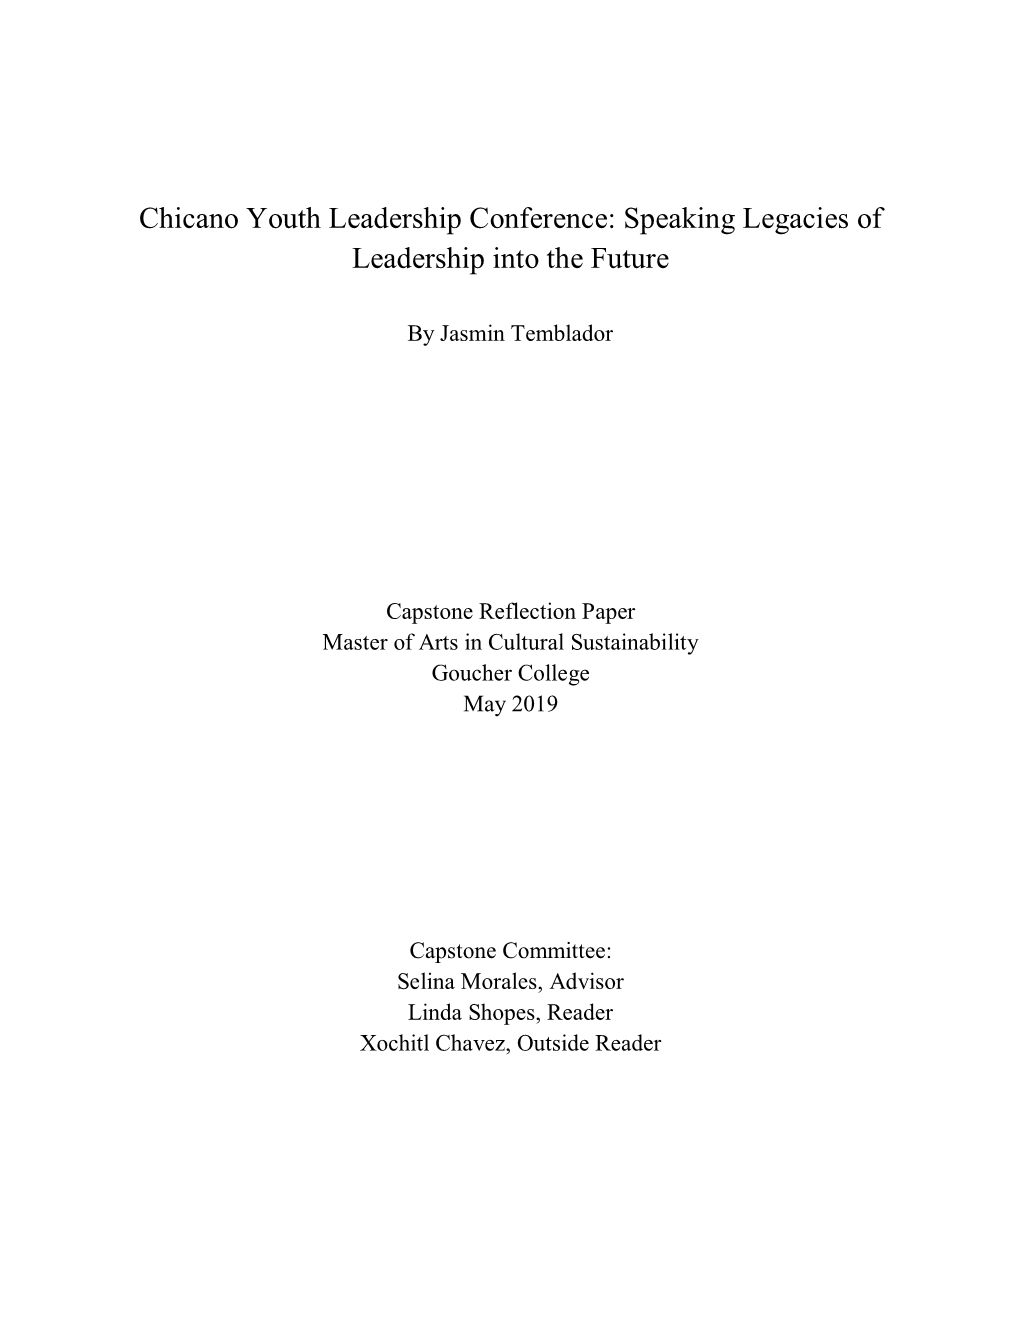 Chicano Youth Leadership Conference: Speaking Legacies of Leadership Into the Future